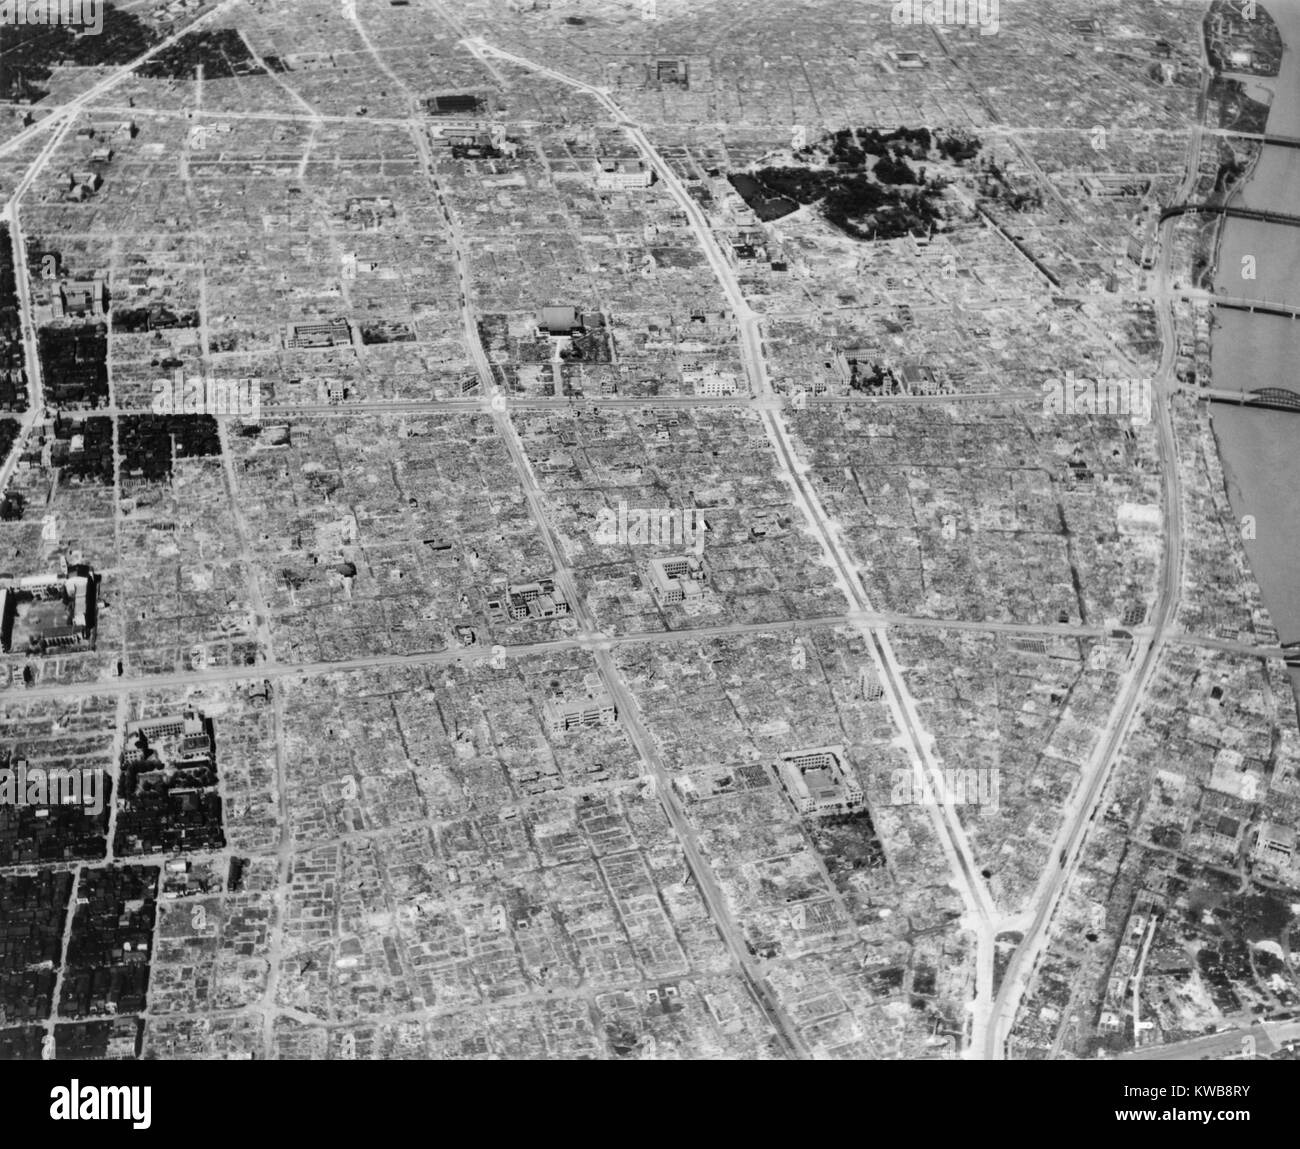 Aerial view of bomb damage in Tokyo, Japan, during the World War 2. 1945. (BSLOC 2014 10 121) Stock Photo